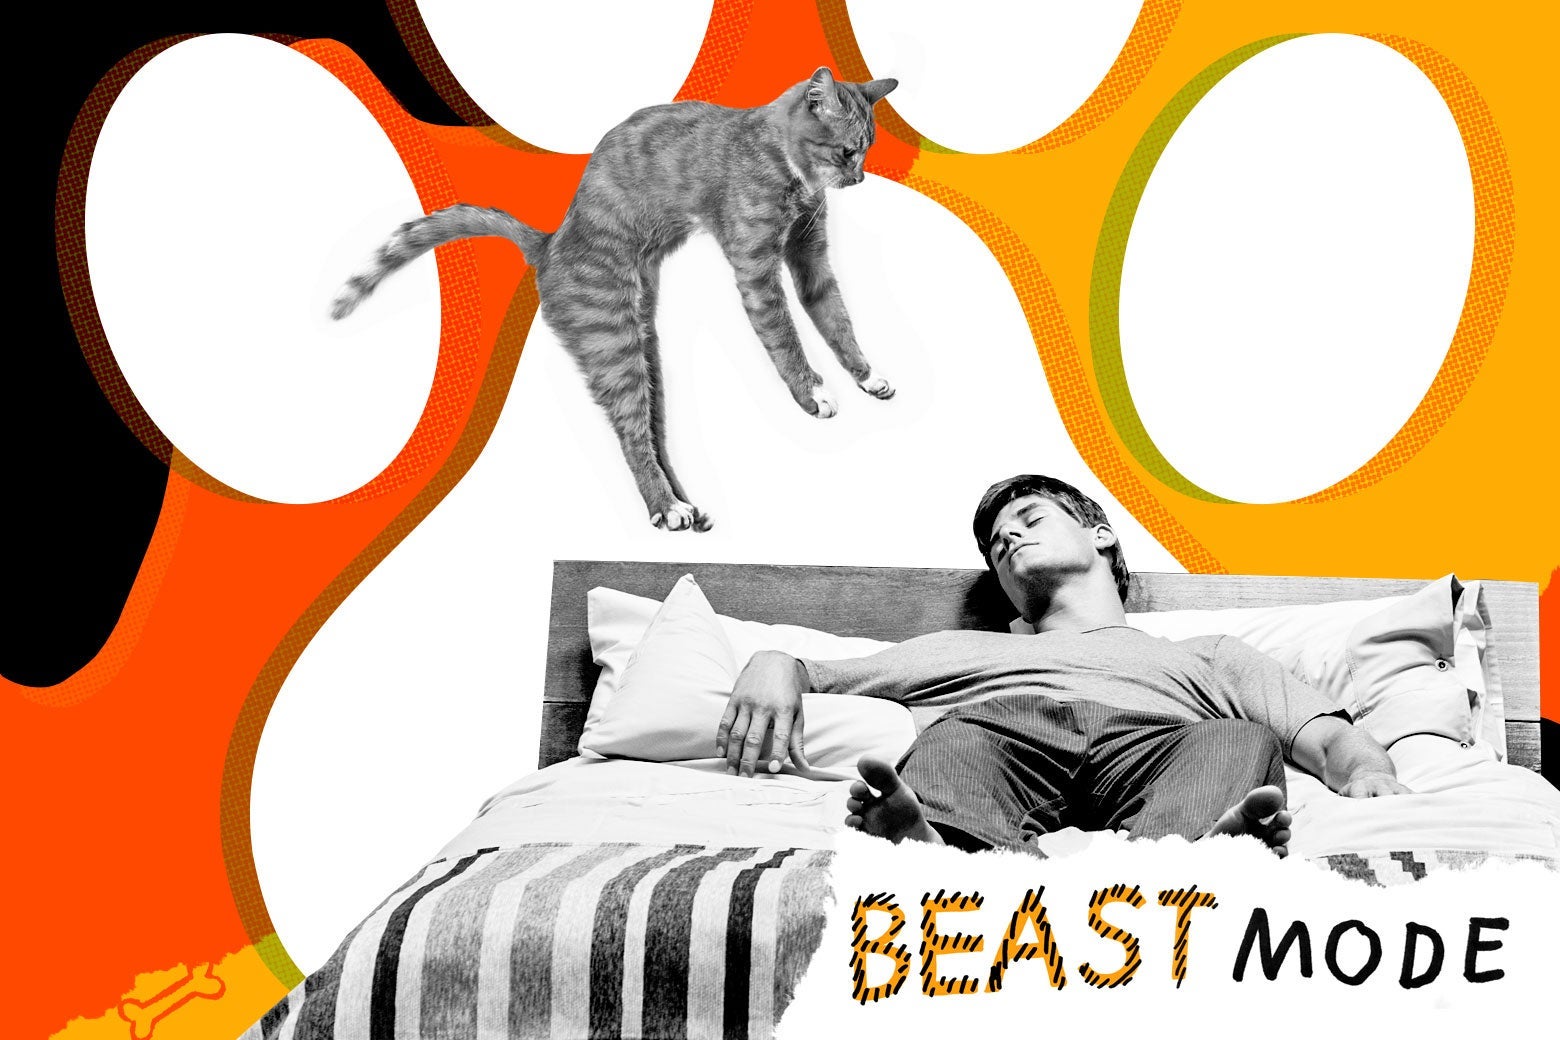 Photo illustration of a cat dive-bombing onto a sleeping man.